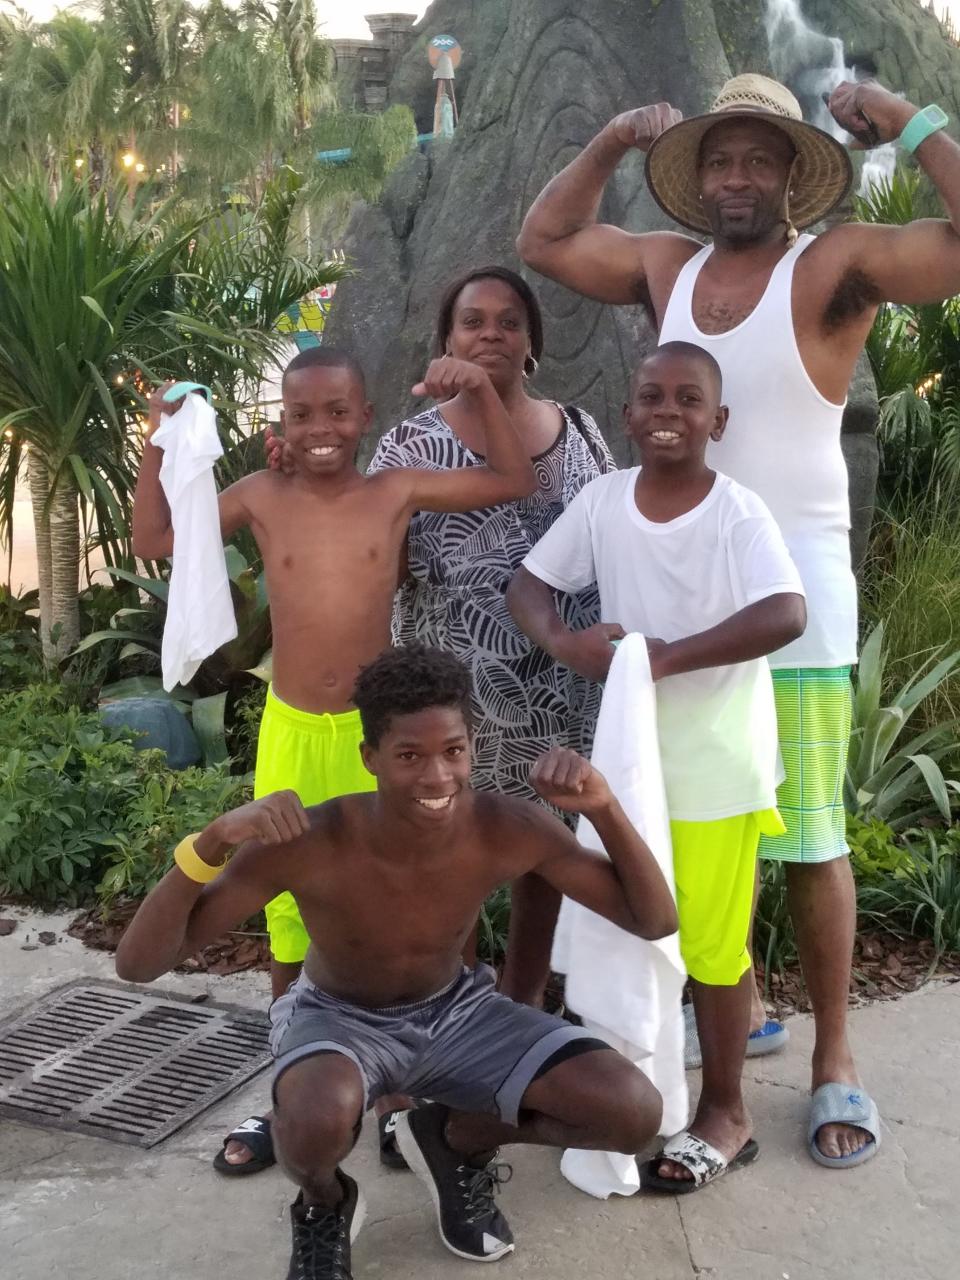 Gifford resident Toshuua Hughes, her husband Rodrick Phinizee, on right, and three of their five children, before she suffered an anoxic brain injury following hysterectomy surgery June 16, 2017 at Indian River Medical Center, in Vero Beach.